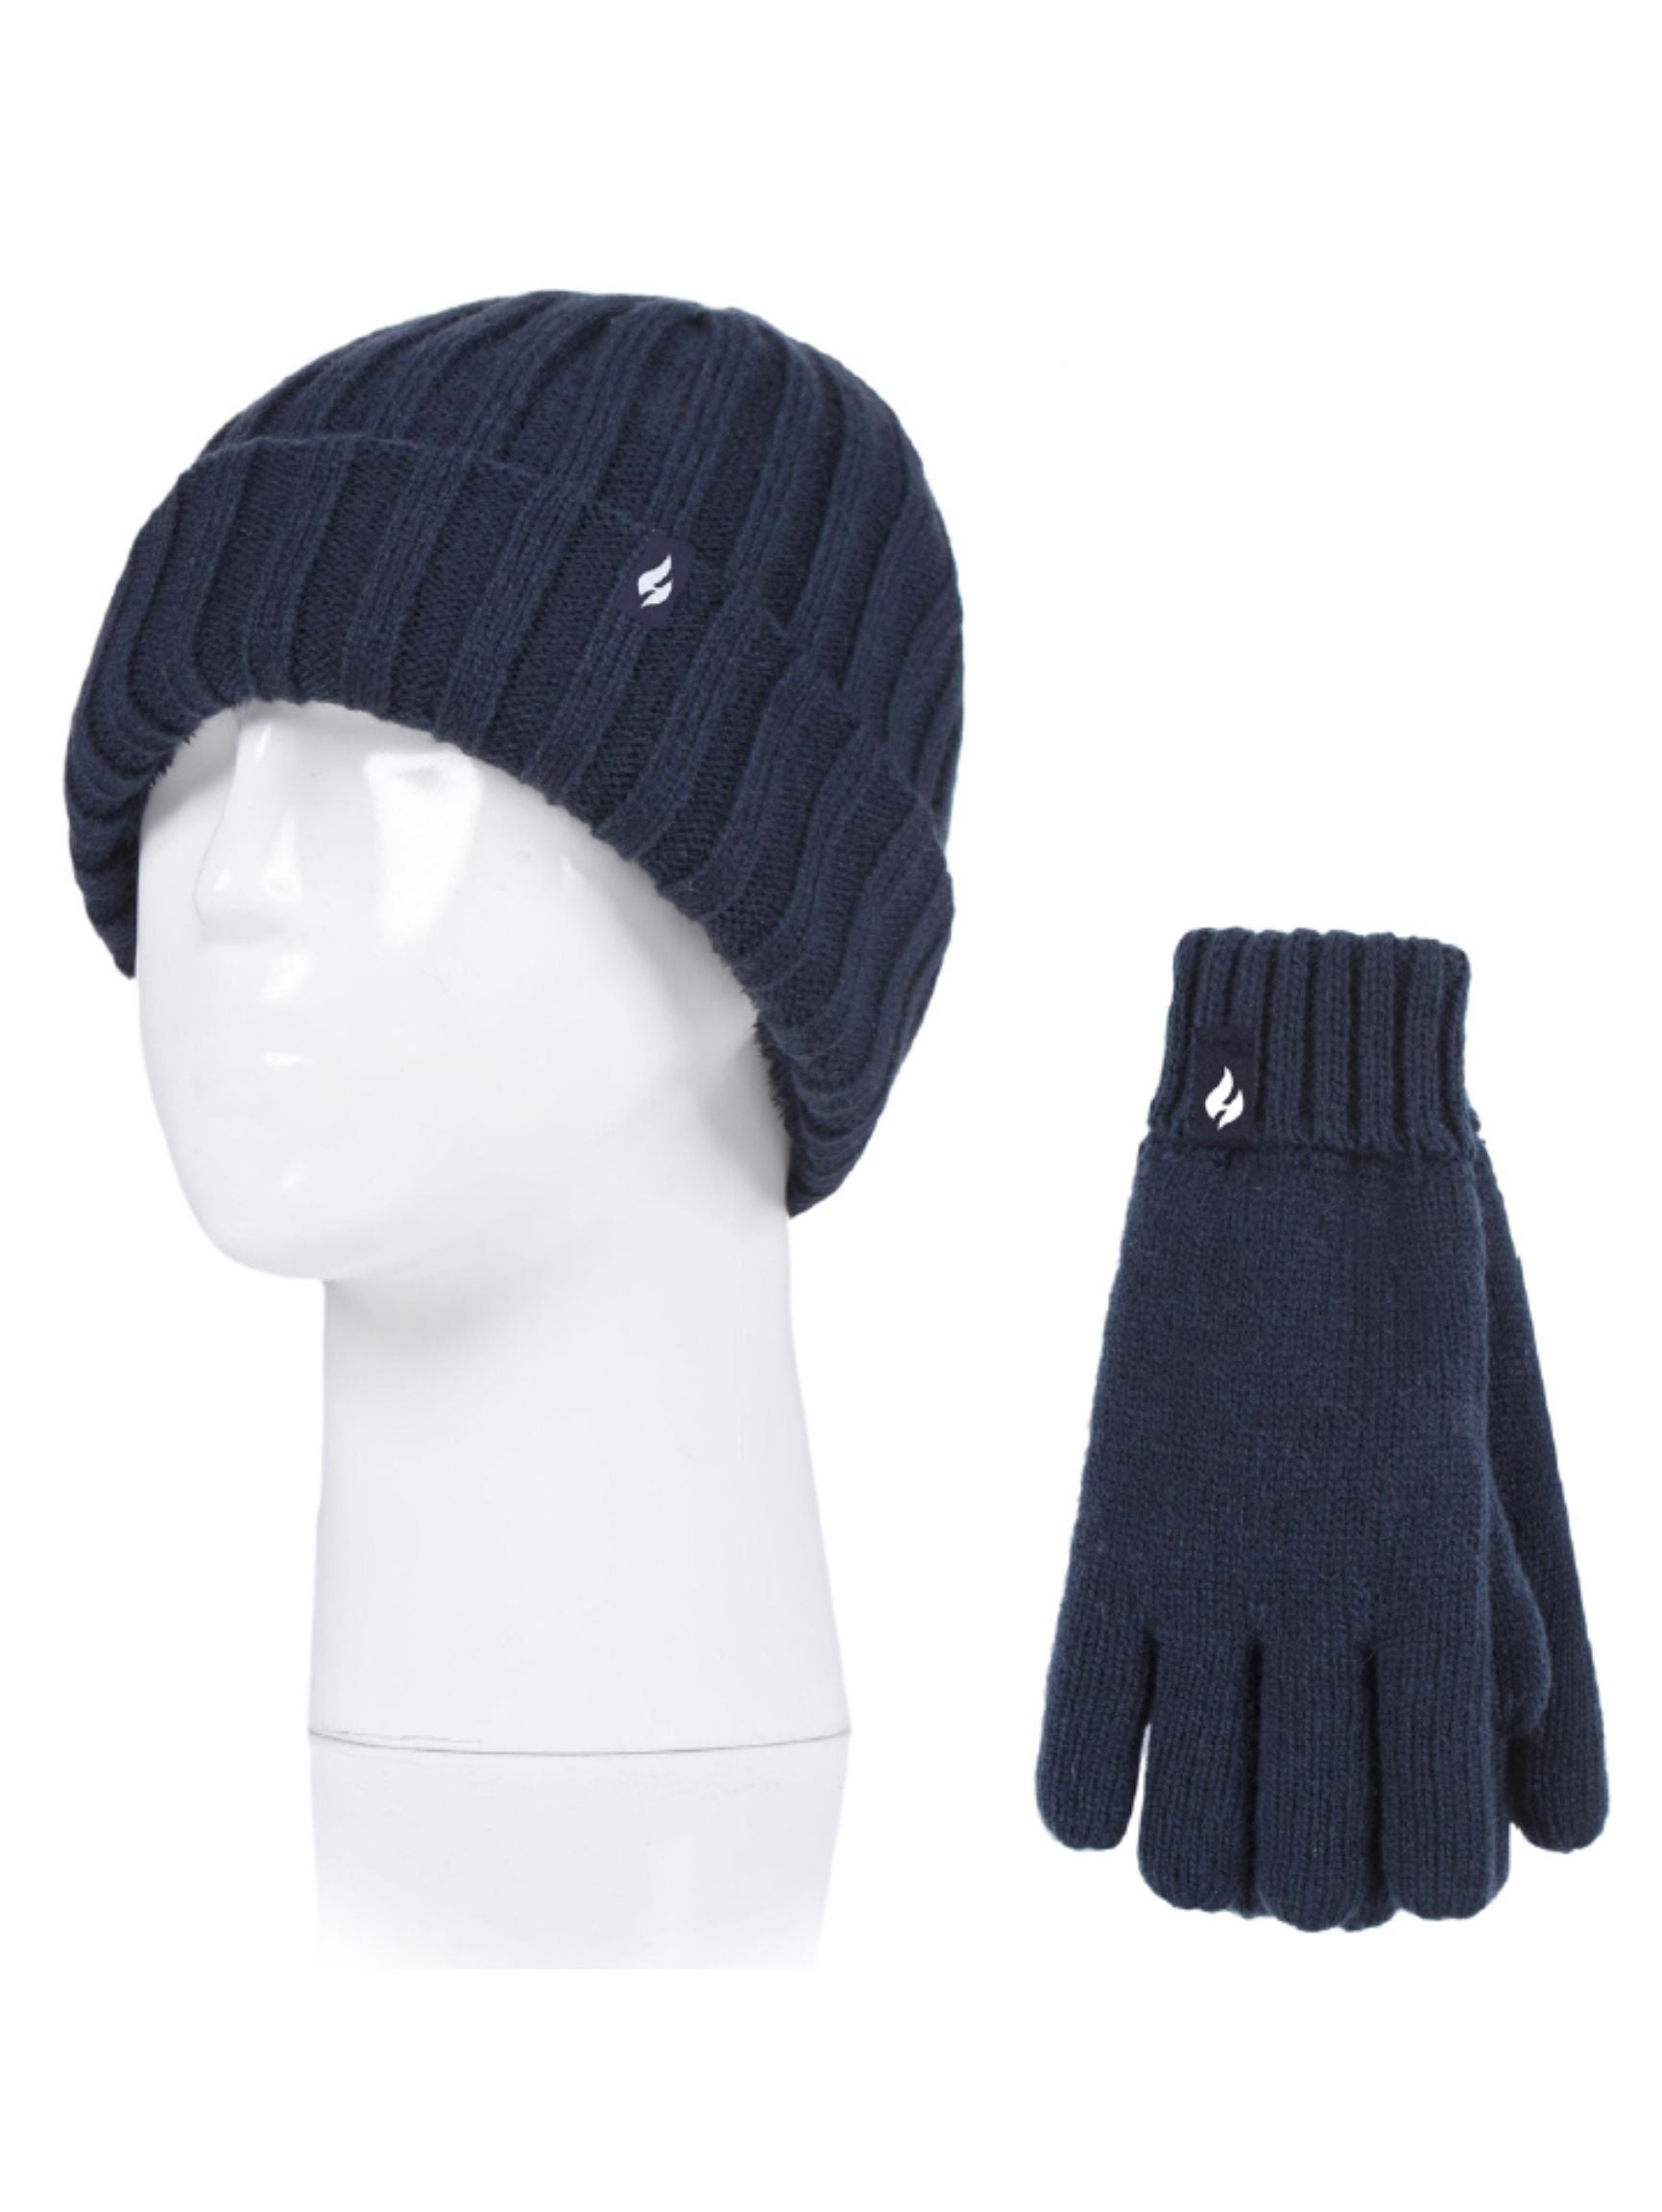 HEAT HOLDERS Open Road Ribbed Turn Over Thermal Beanie and Gloves-Boys 7-10 years